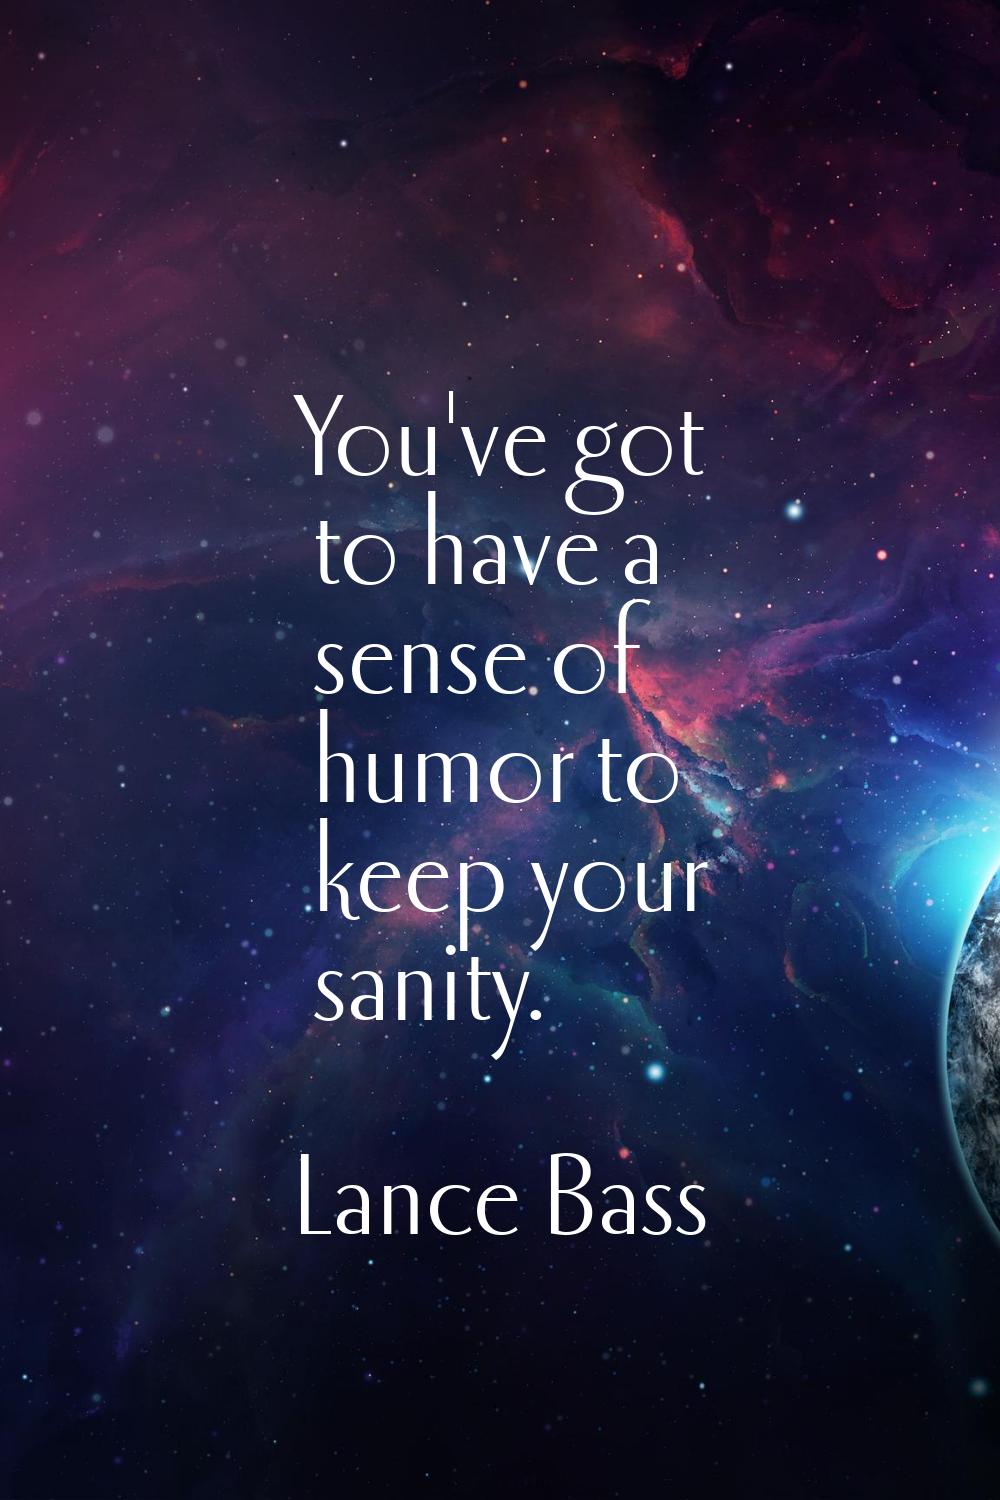 You've got to have a sense of humor to keep your sanity.